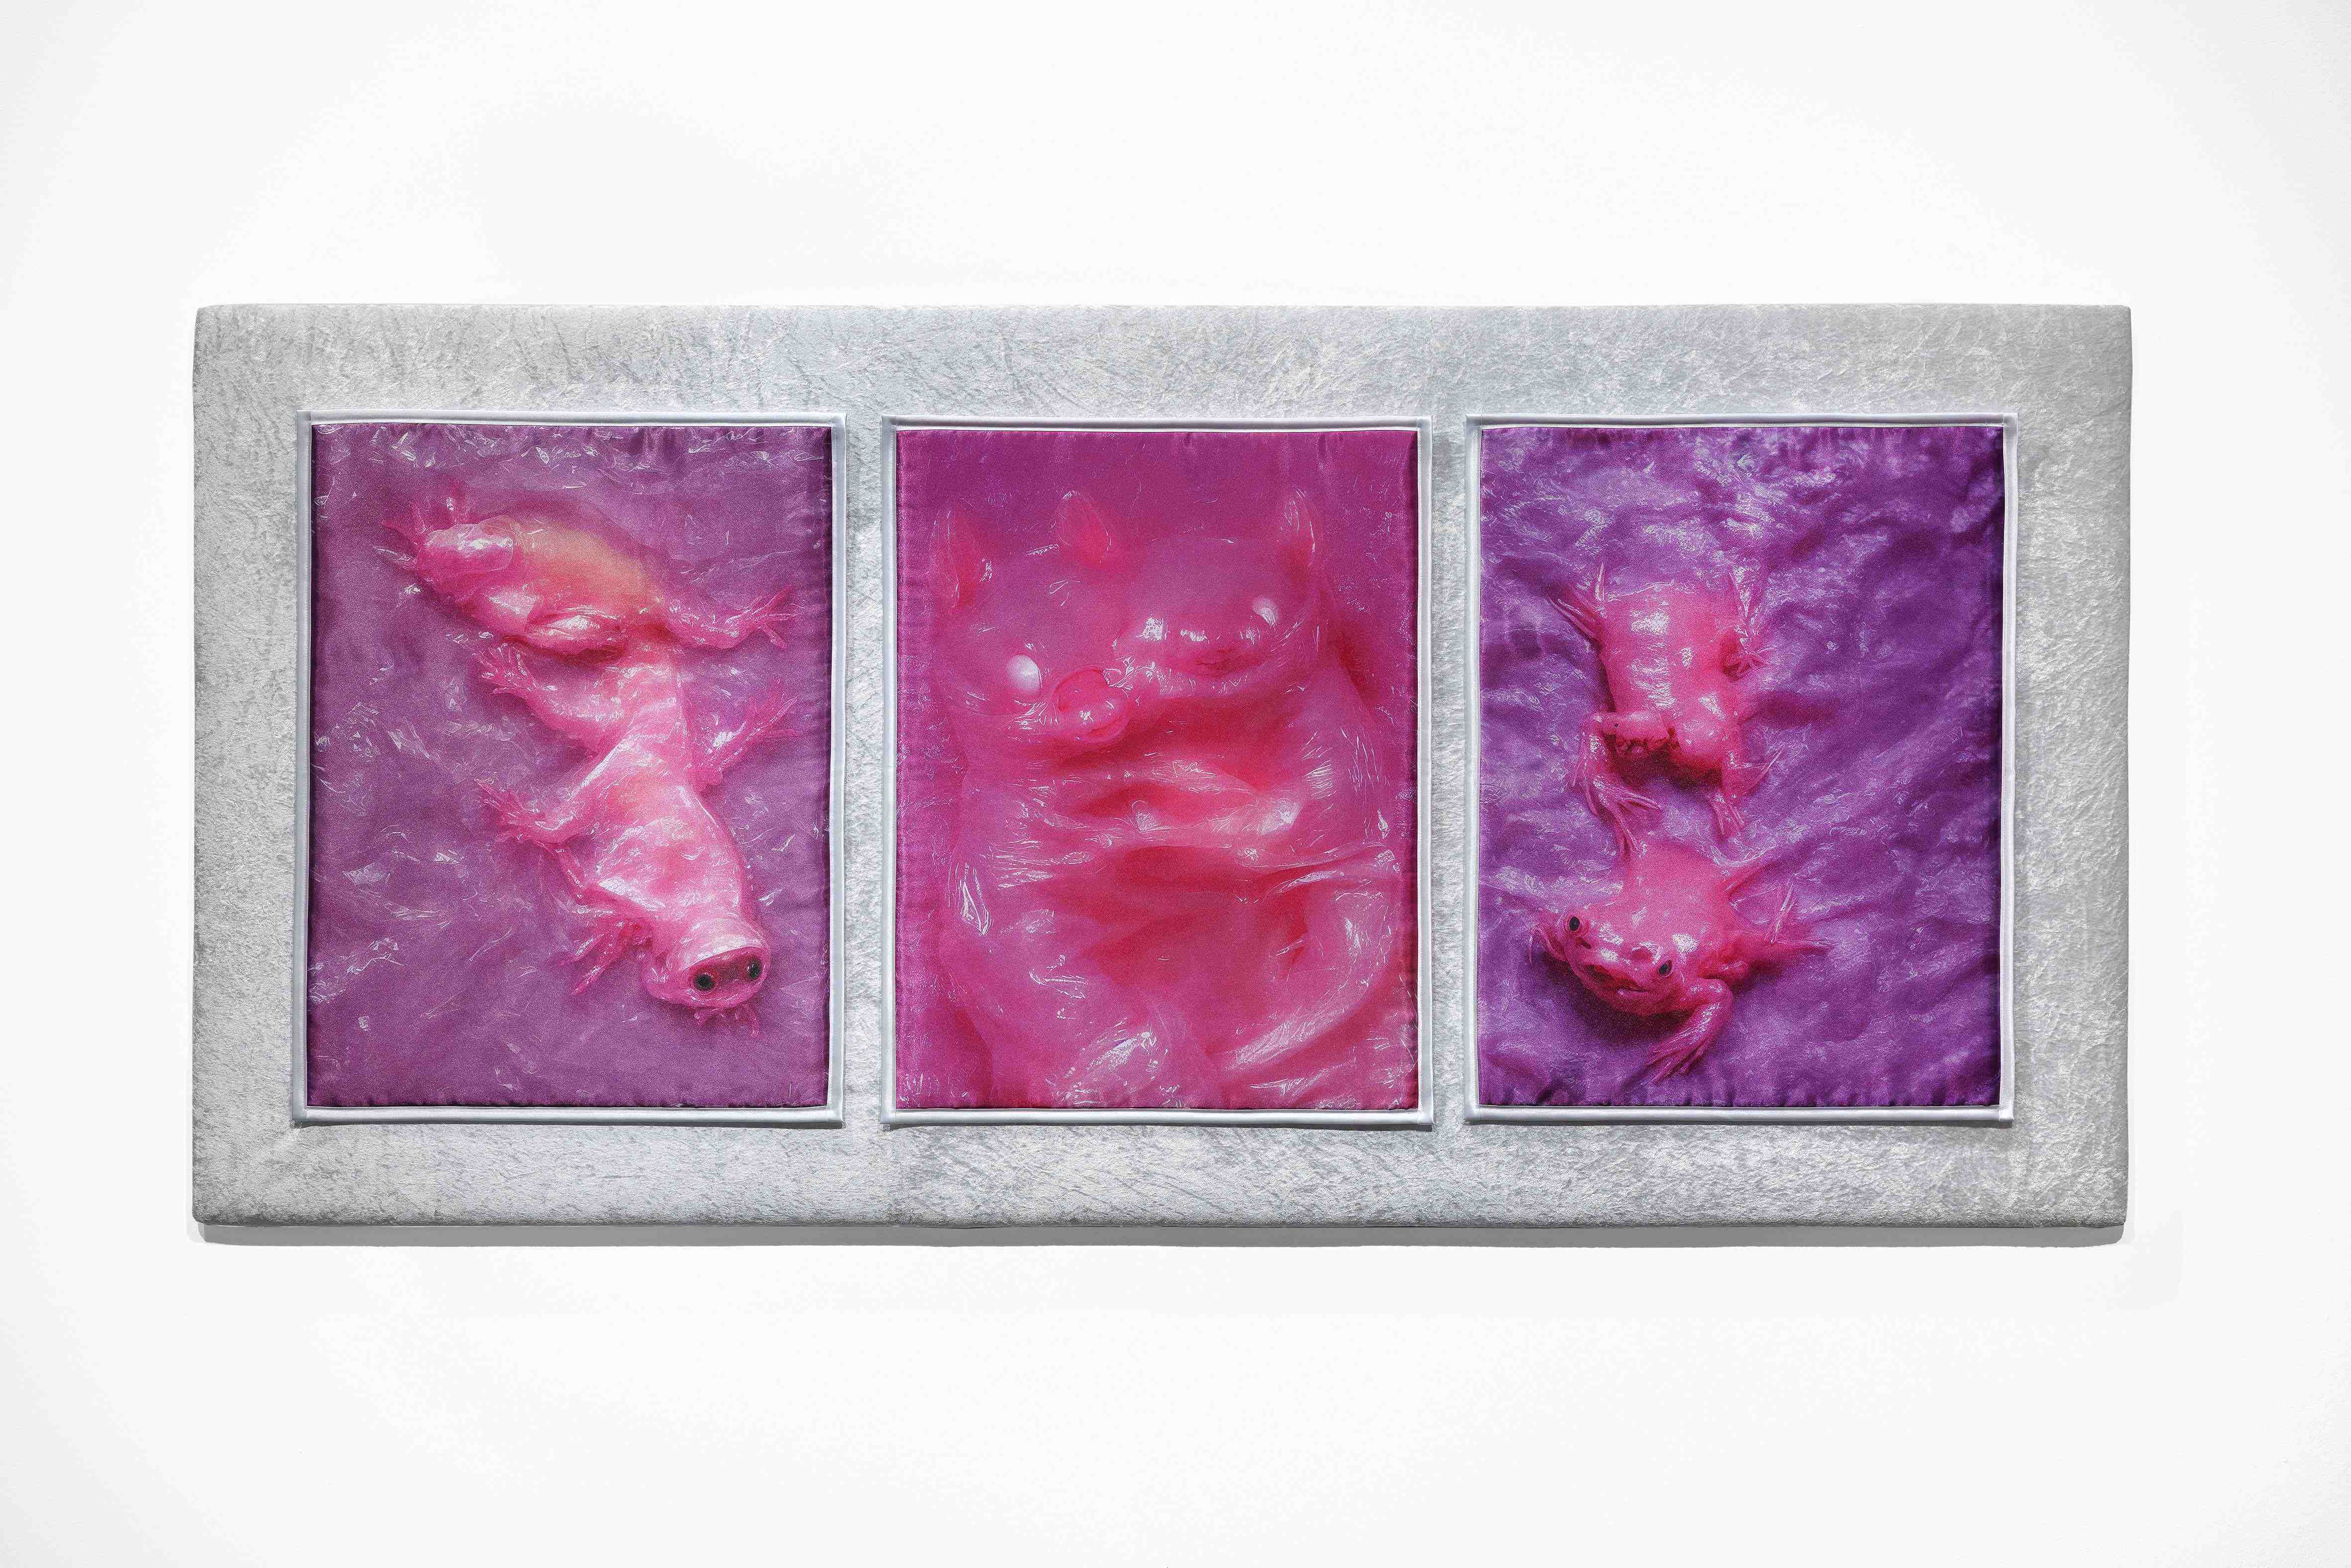 Mary-Audrey Ramirez, Forced Amnesia, installation view (Triptyh, Middle: The Lovers (in love), Left and right: The Haters (in goo), satin print on crushed velvet, 2022), Kunsthalle Gießen, 2023 © Günzel Rademacher